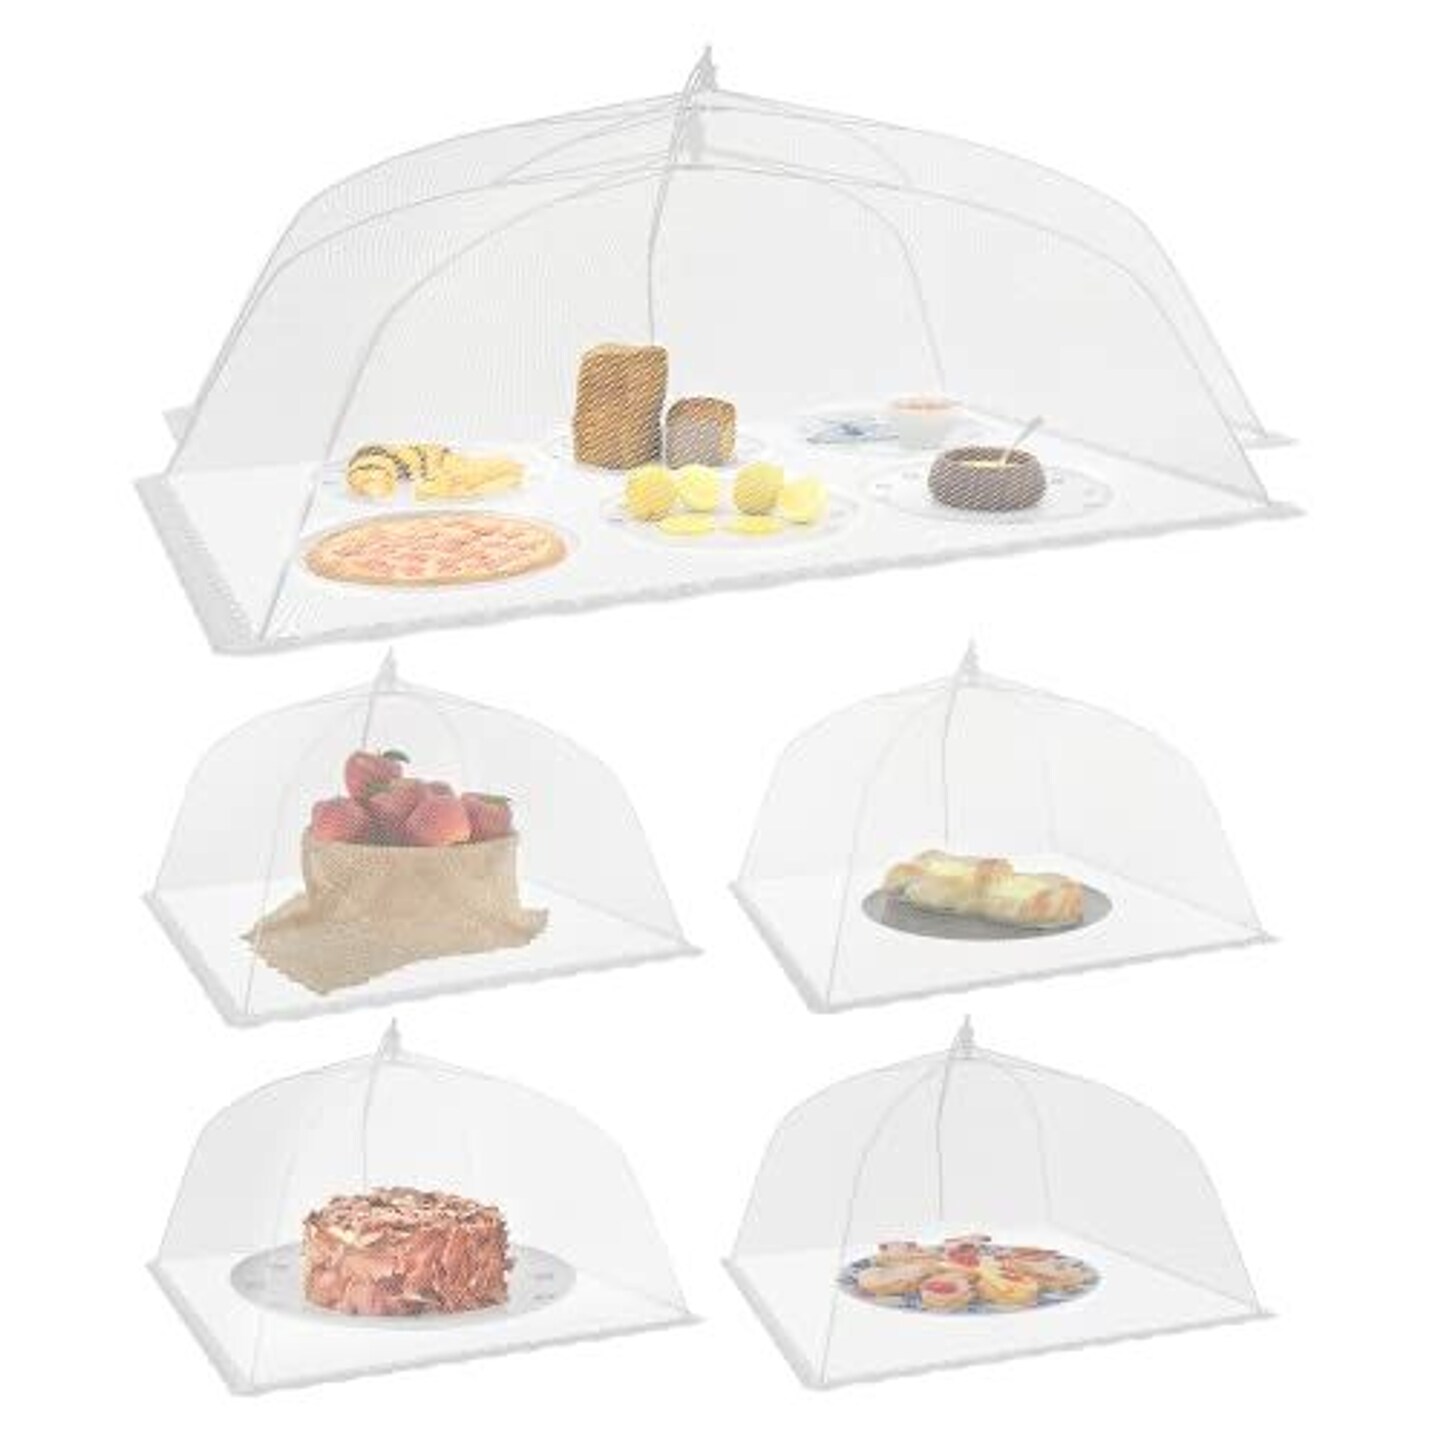 Simply Genius Mesh Food Cover Set, 2 Jumbo (39&#x22; x 24&#x22;) &#x26; 4 Large (17&#x201D;x17&#x201D;) Pop-Up Food Tents/Food Covers For Outdoors, Reusable and Collapsible, Food Nets, 6 Pack